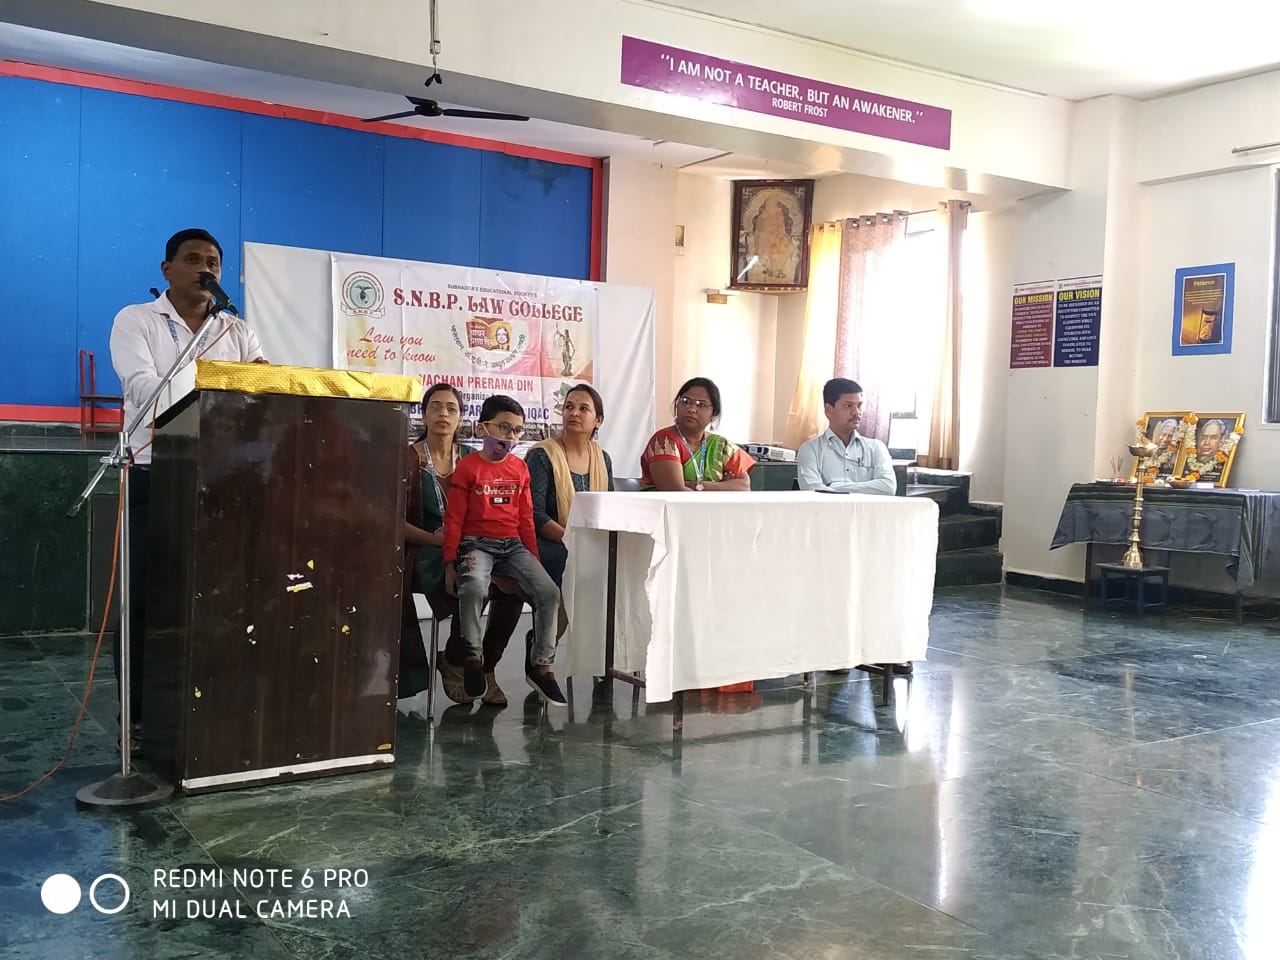 S. N.B.P. Organizing Reading Inspiration Day in Law College